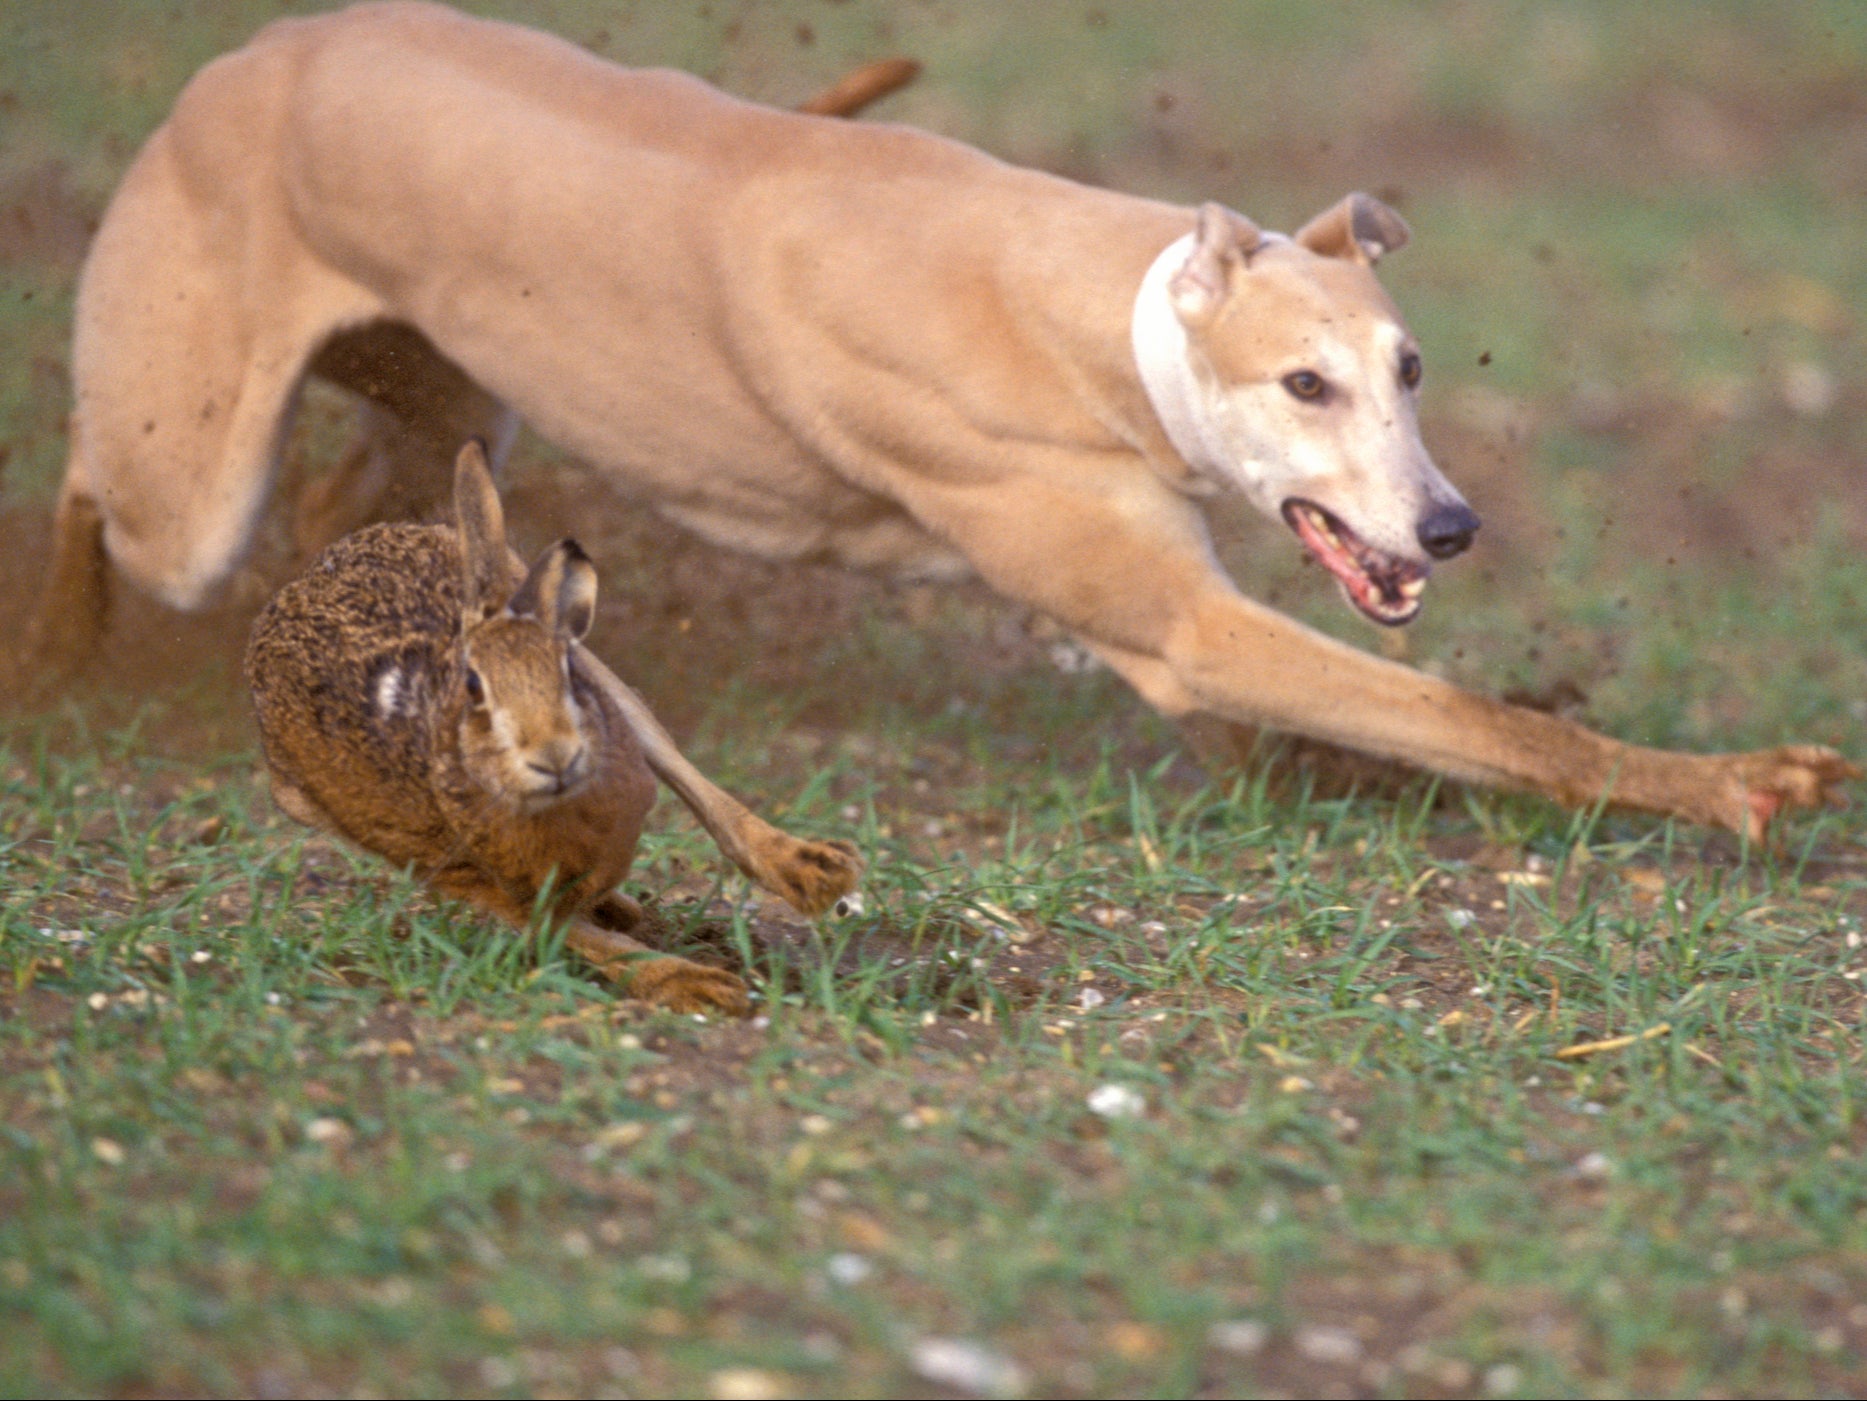 Hare coursing was banned in the UK in 2004, but illegal events are still held regularly